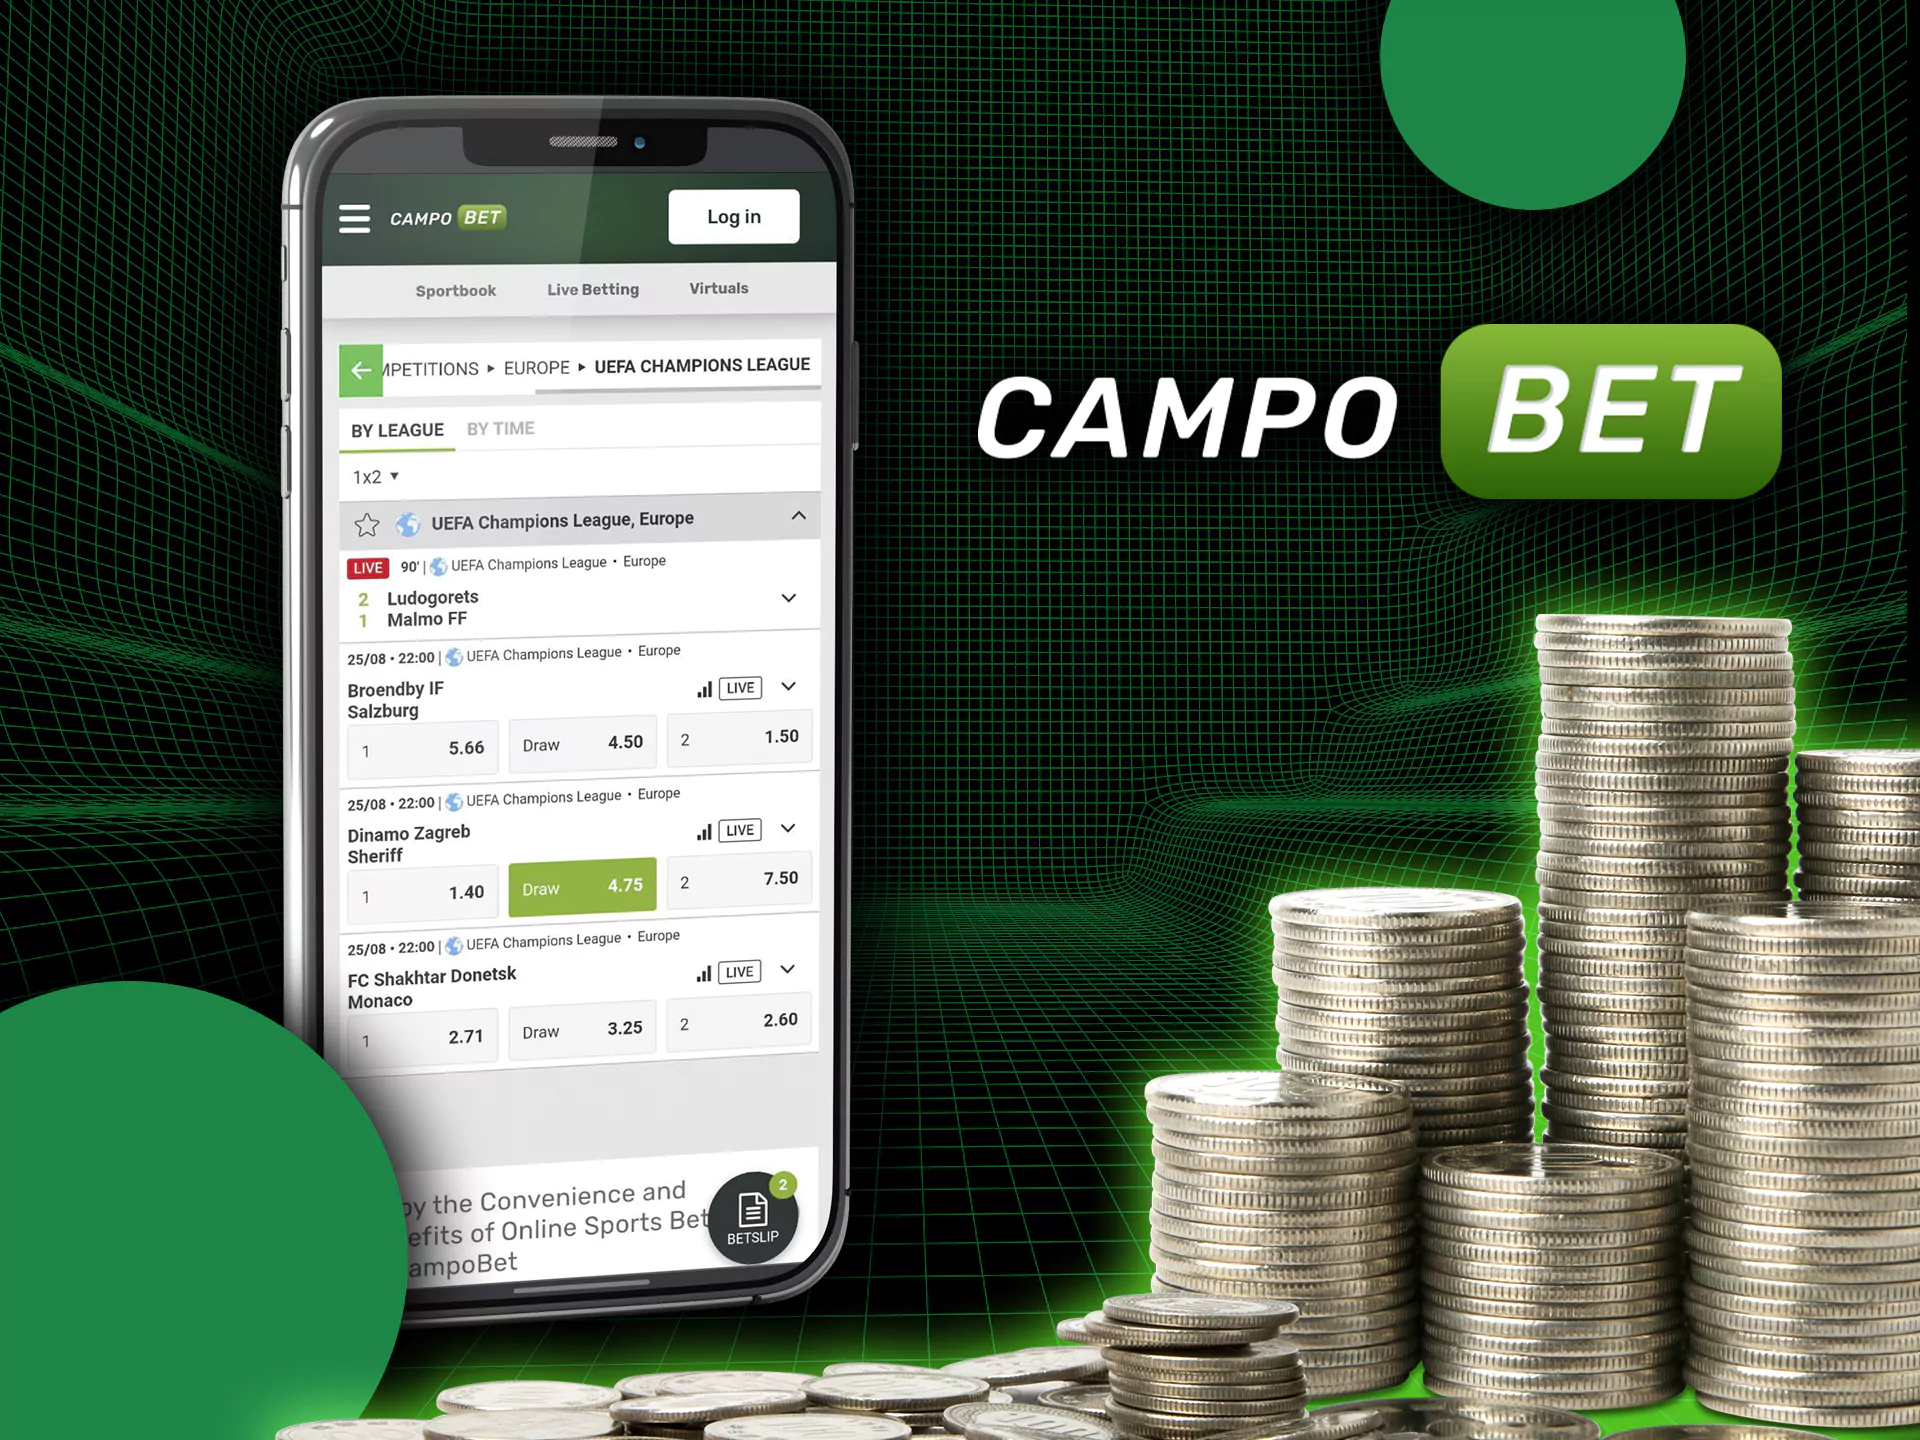 Campobet as many other bookmakers' offices provides bonuses on expresses.